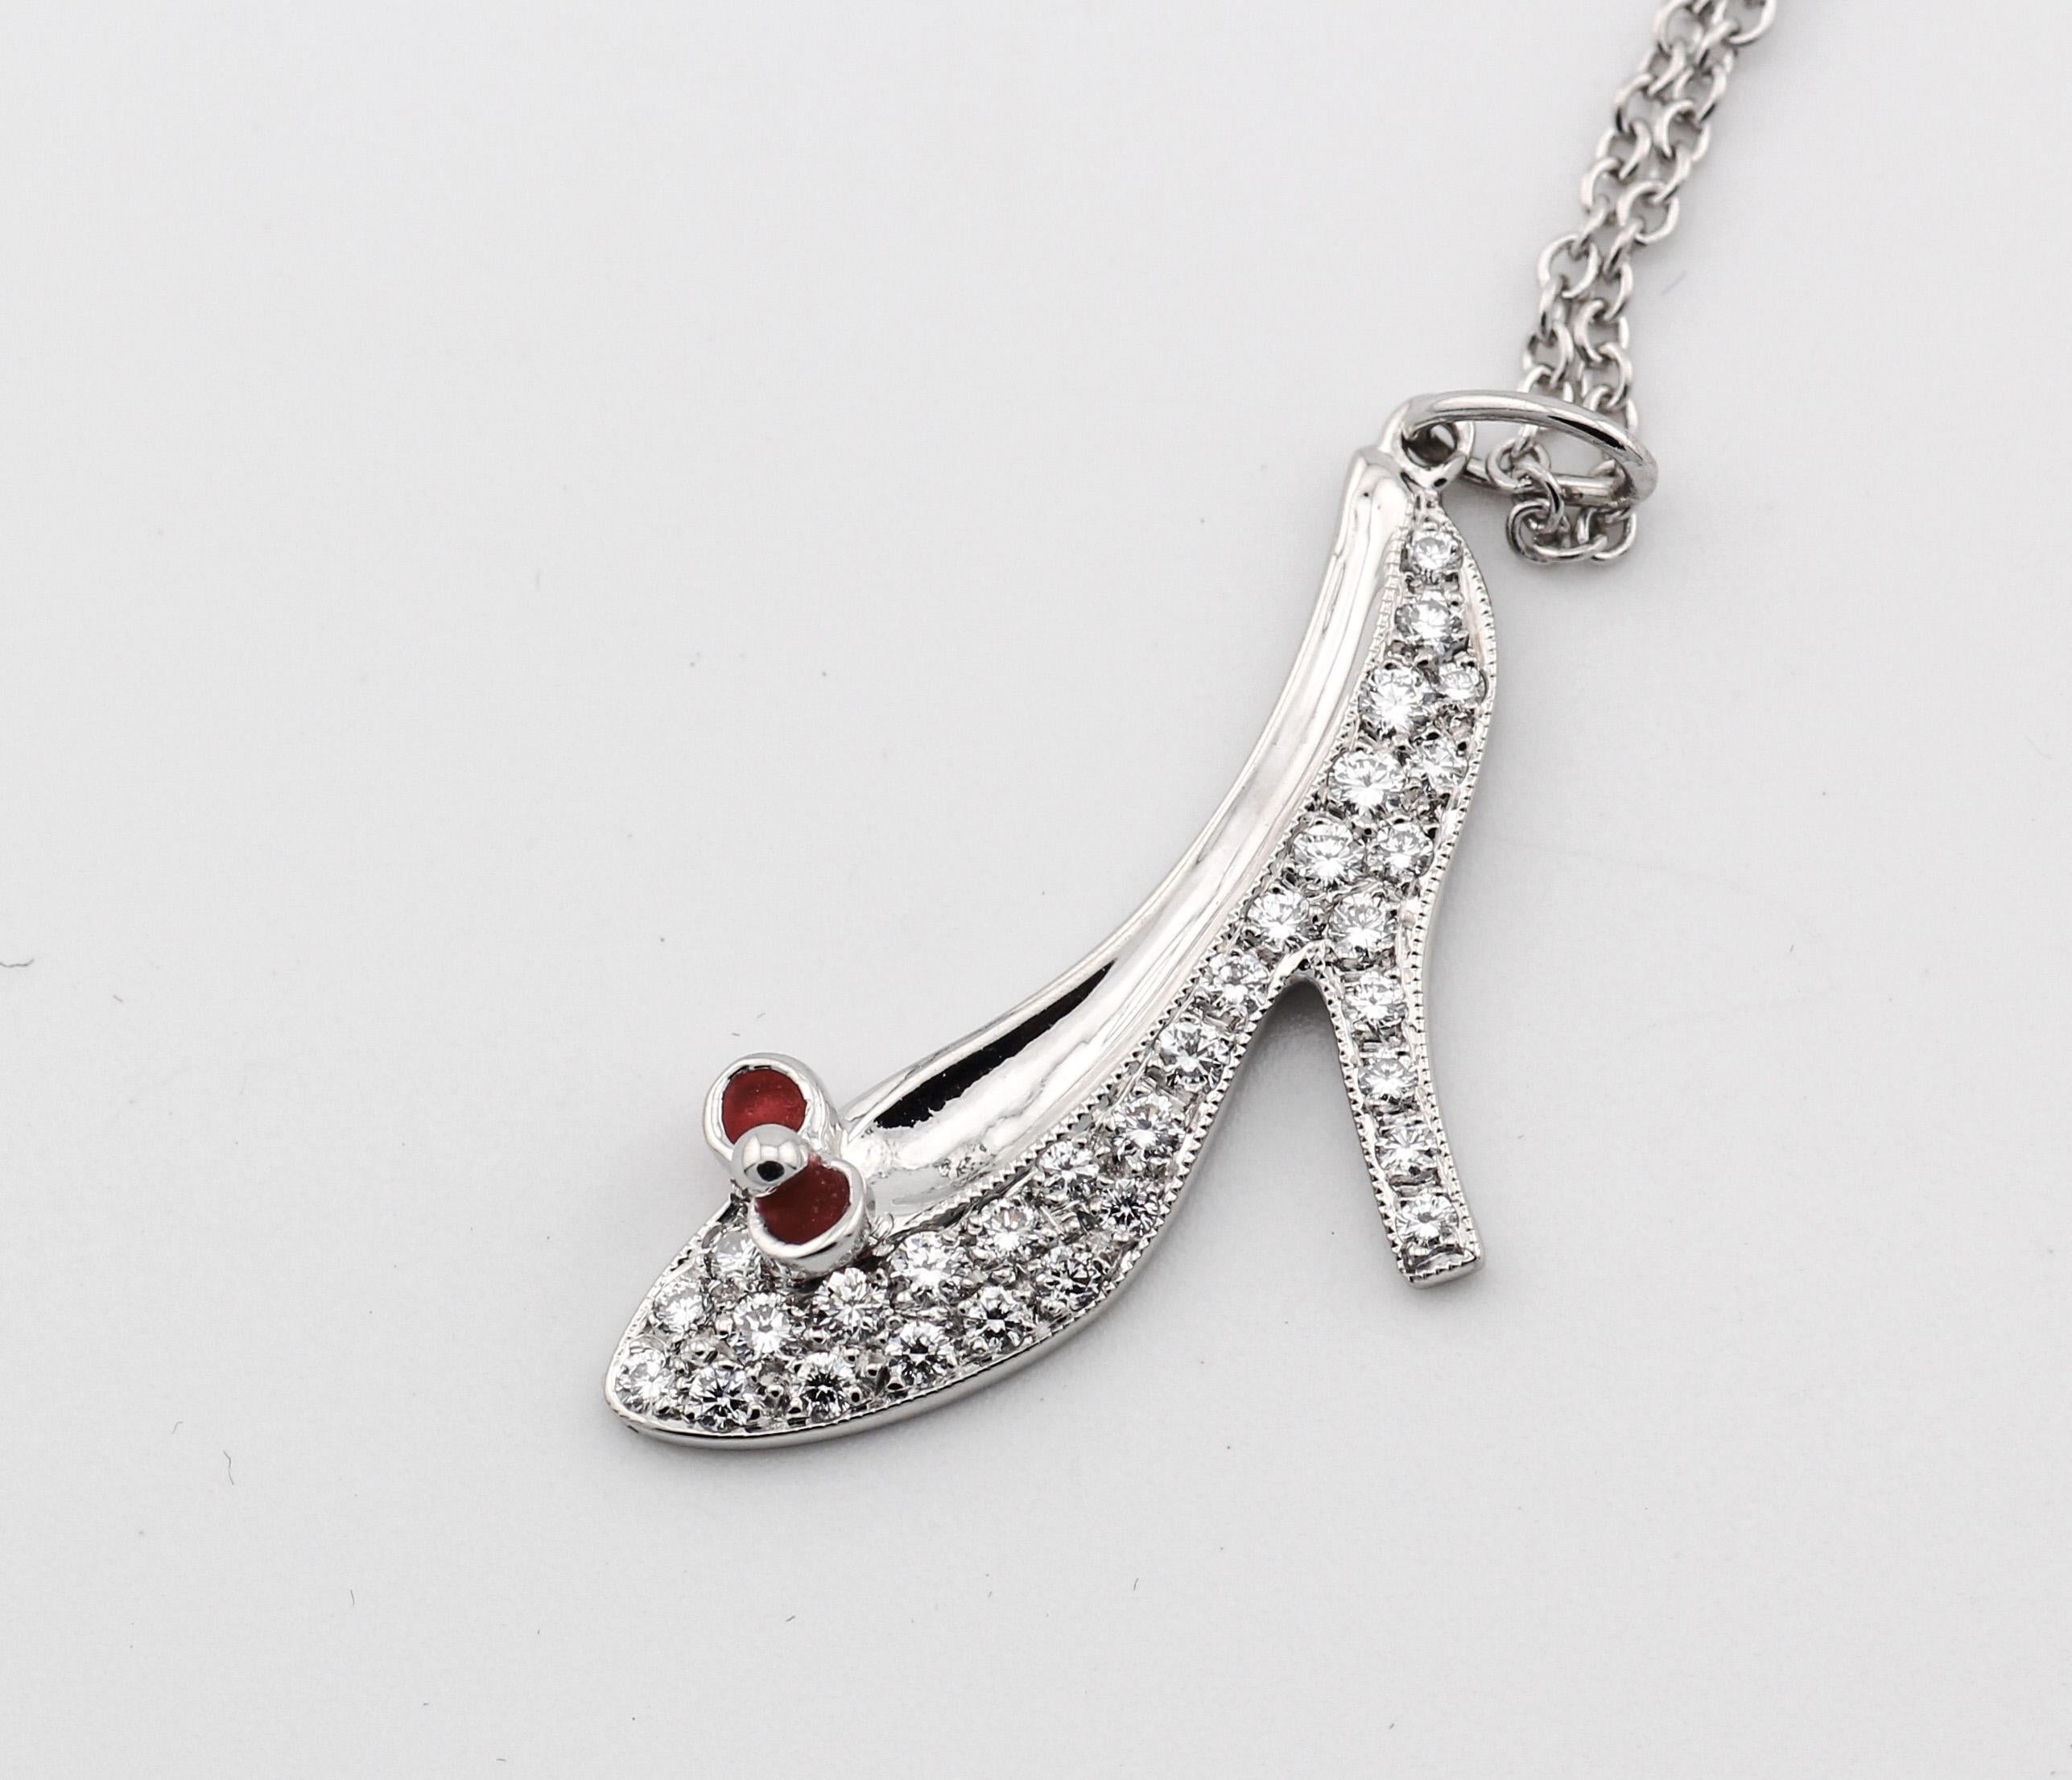 The Tiffany & Co. Diamond Red Enamel Platinum High Heel Shoe Charm Pendant Necklace is a striking fusion of glamour and whimsy, capturing the essence of timeless elegance with a playful twist. Crafted by the renowned luxury jeweler Tiffany & Co.,